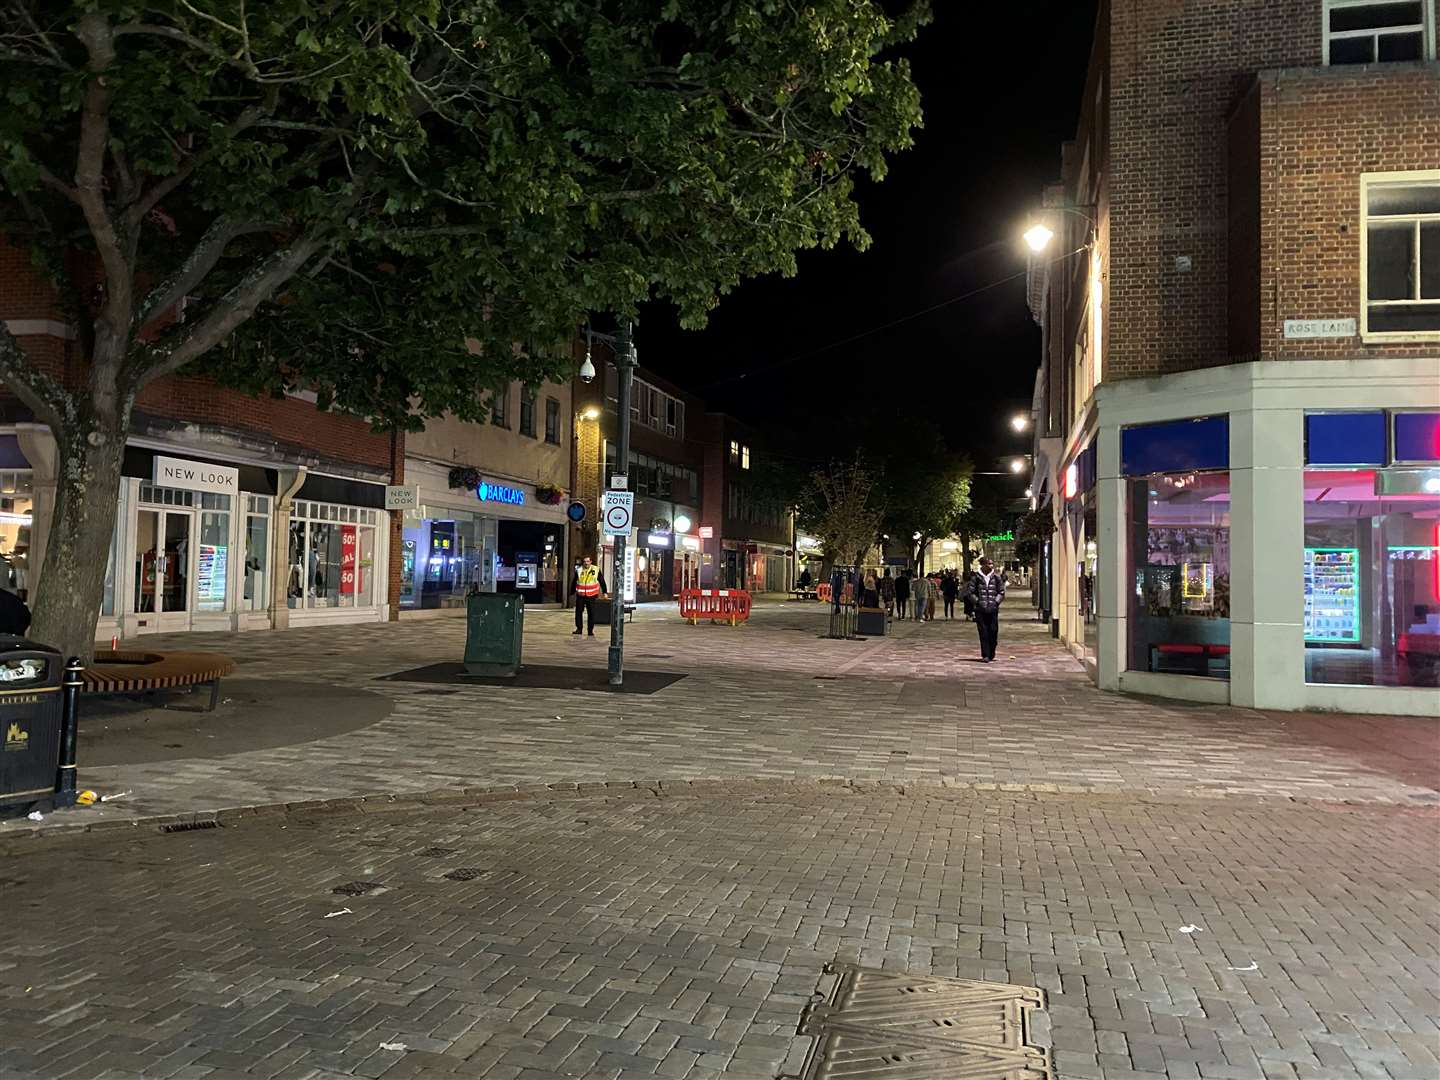 The incident reportedly occurred on Canterbury High Street